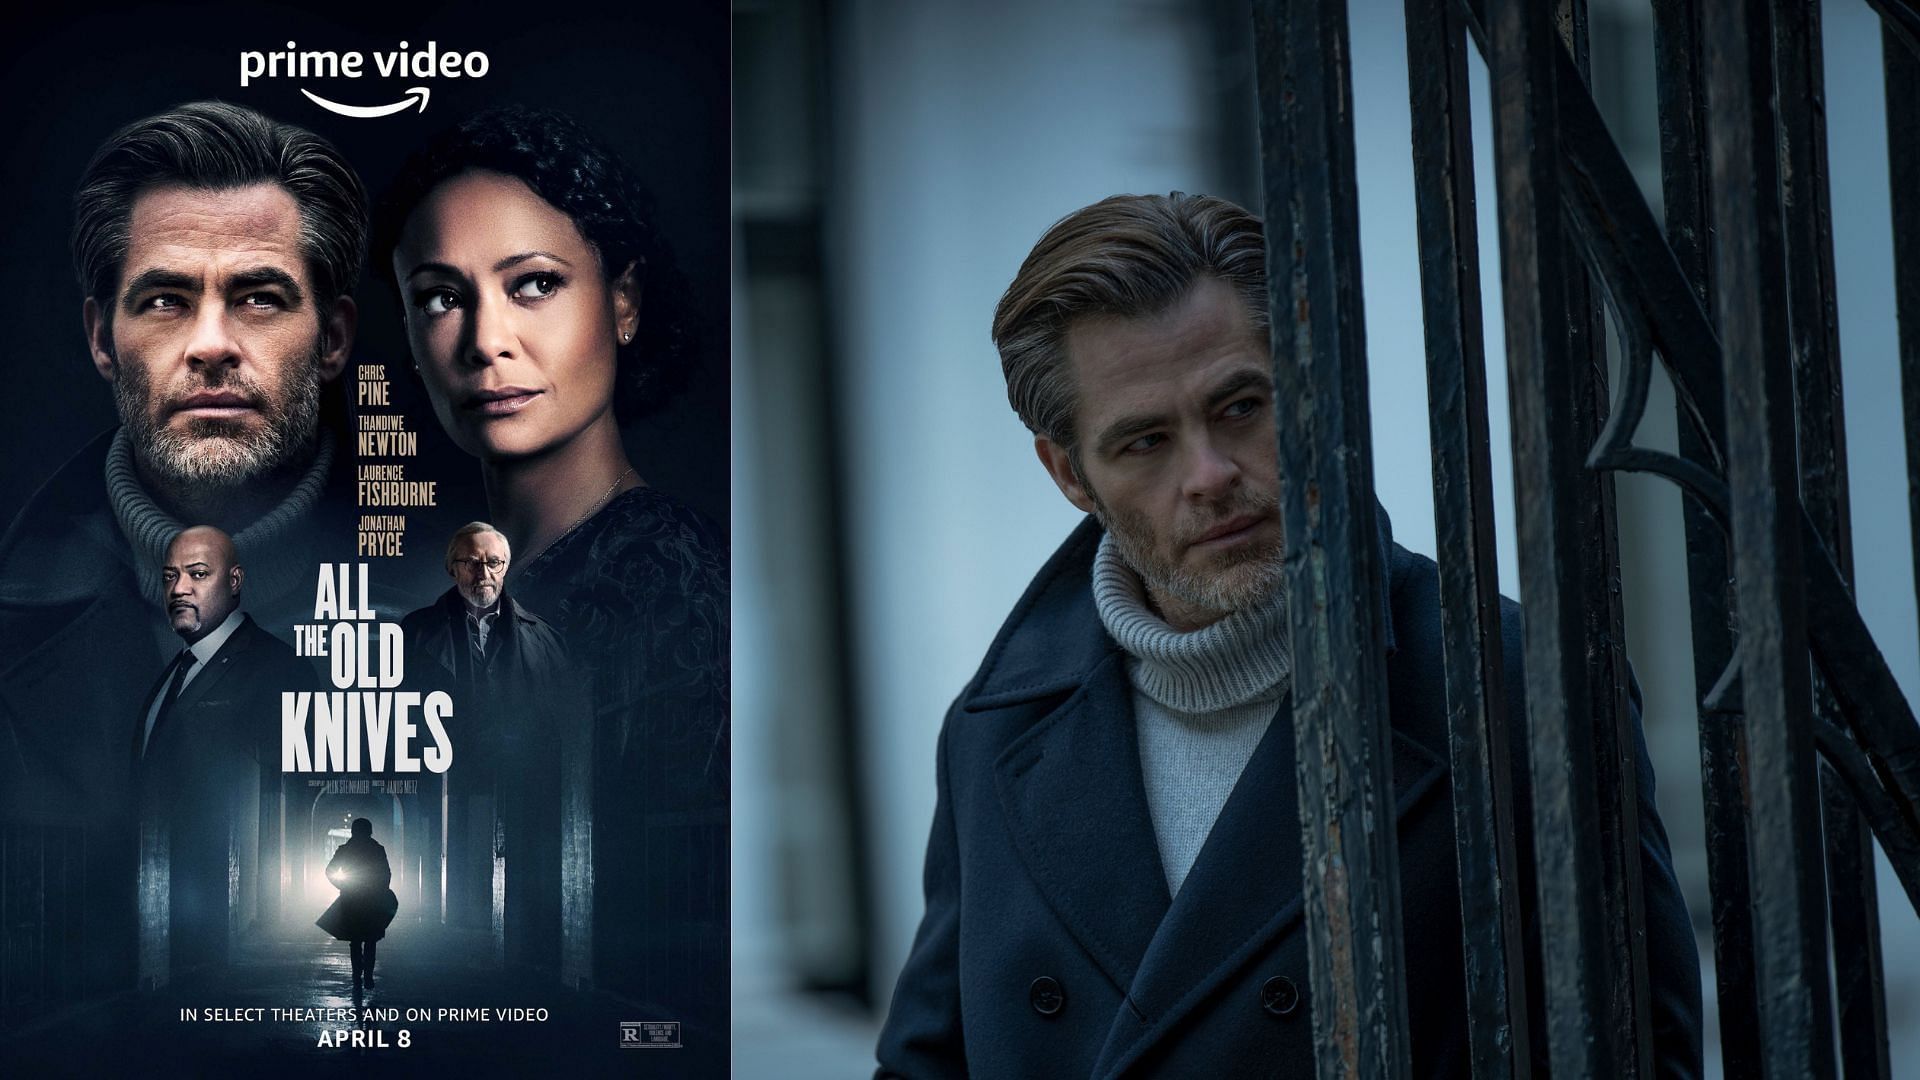 Chris Pine-starrer espionage thriller All the Old Knives will air on Prime Video this April 8 (Image via @msbreviews, @pramitheus/Twitter)